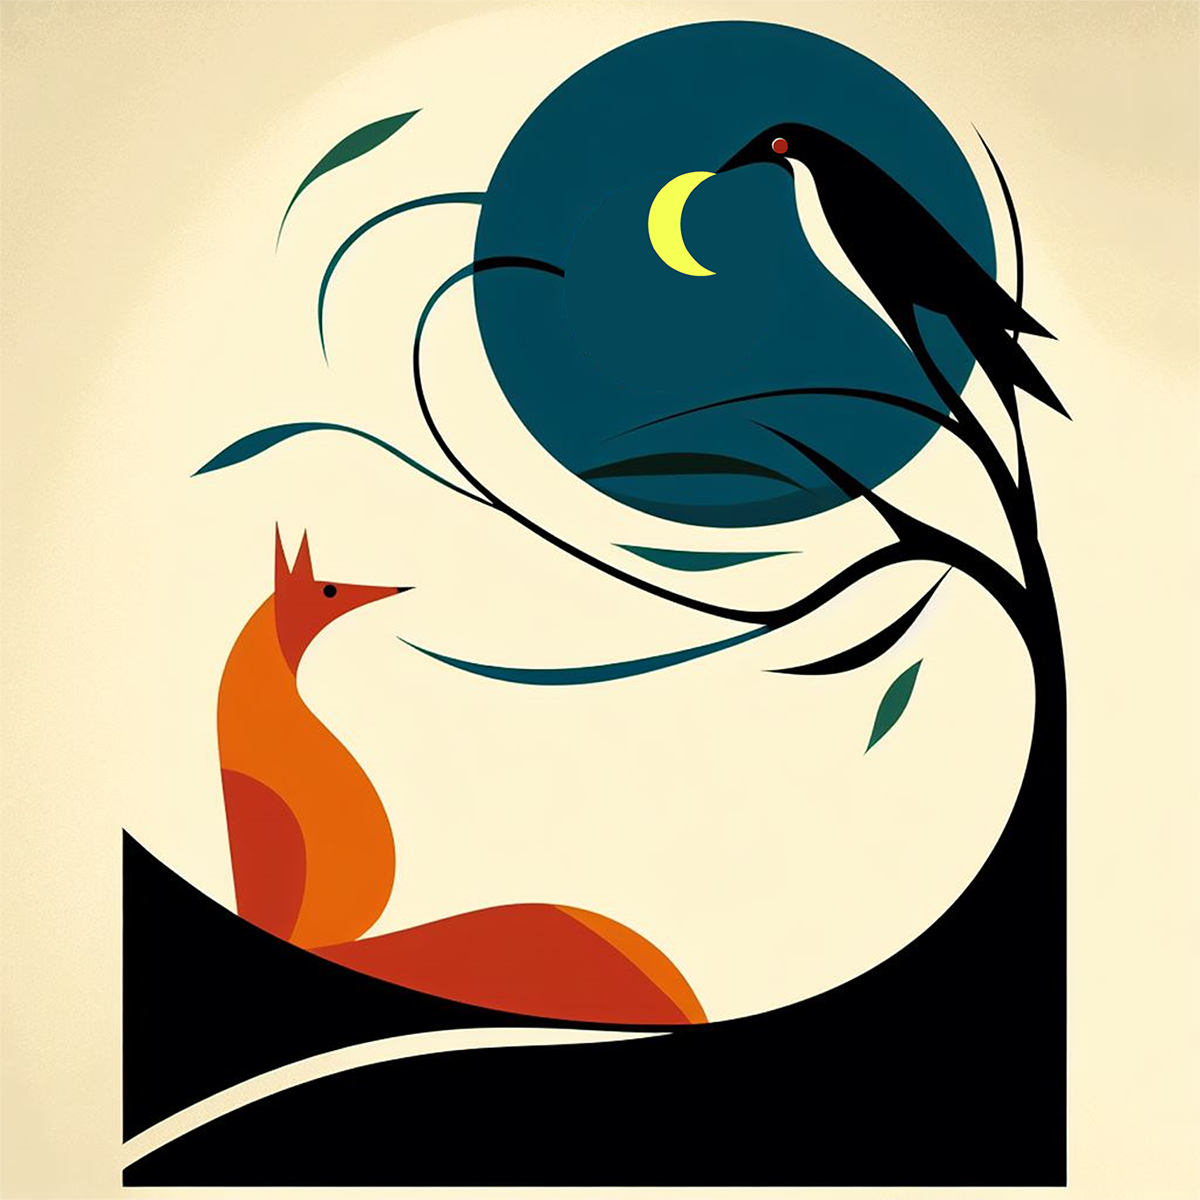 The fox tricked by the raven